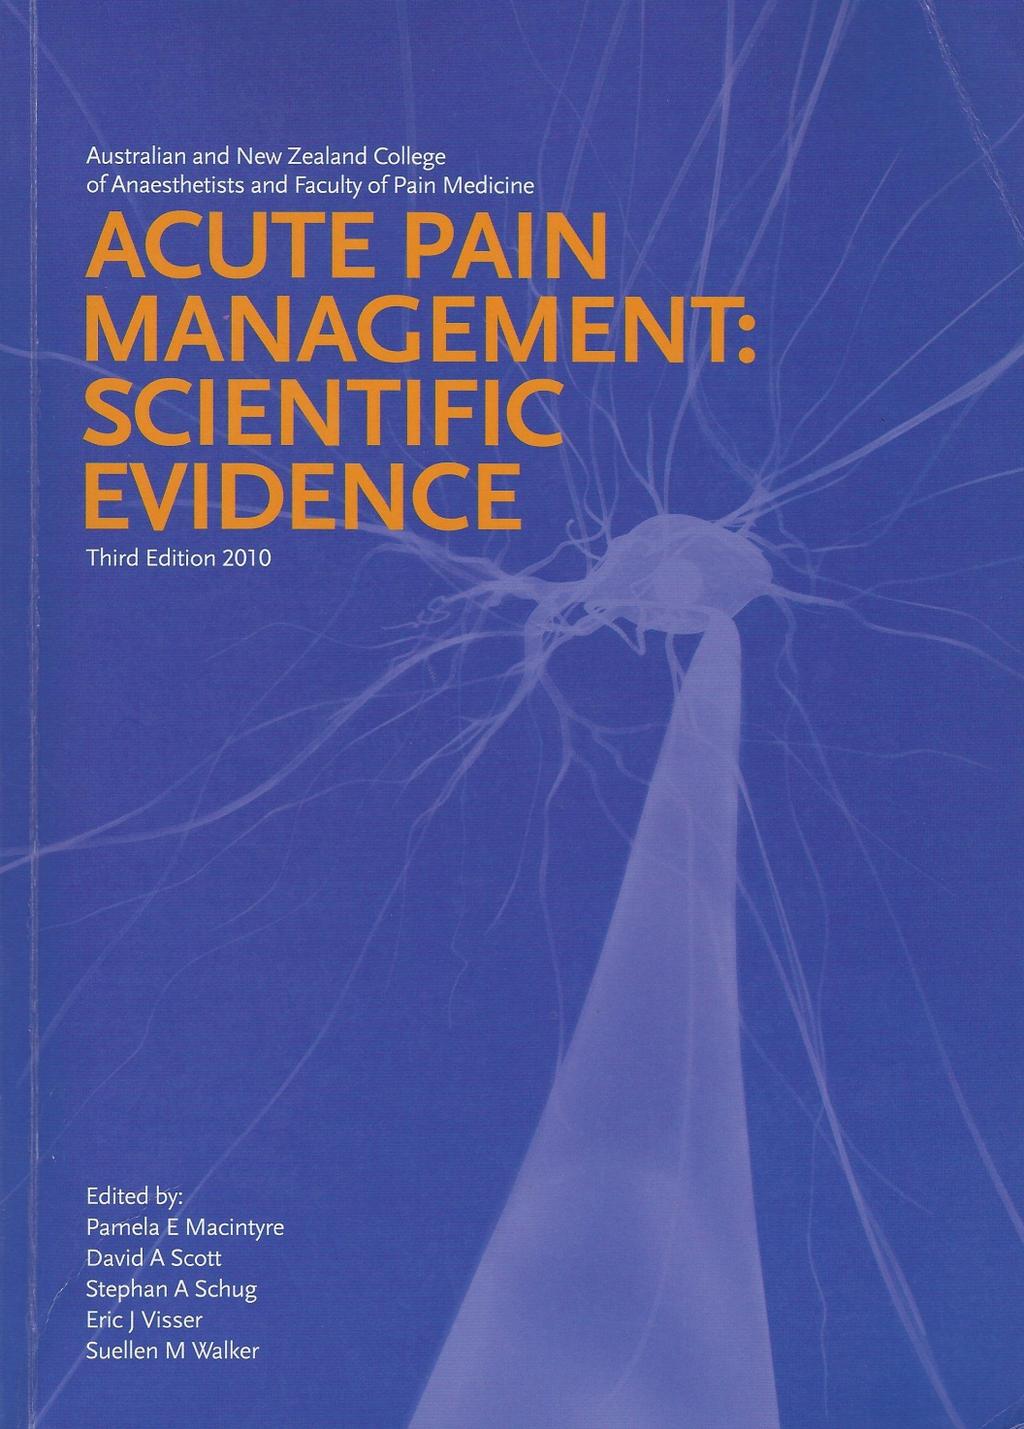 Scientific Evidence 3 rd Edition 2010 Written by a multidisciplinary team Published by the NHMRC Endorsed by the IASP, American Academy of Pain Medicine and